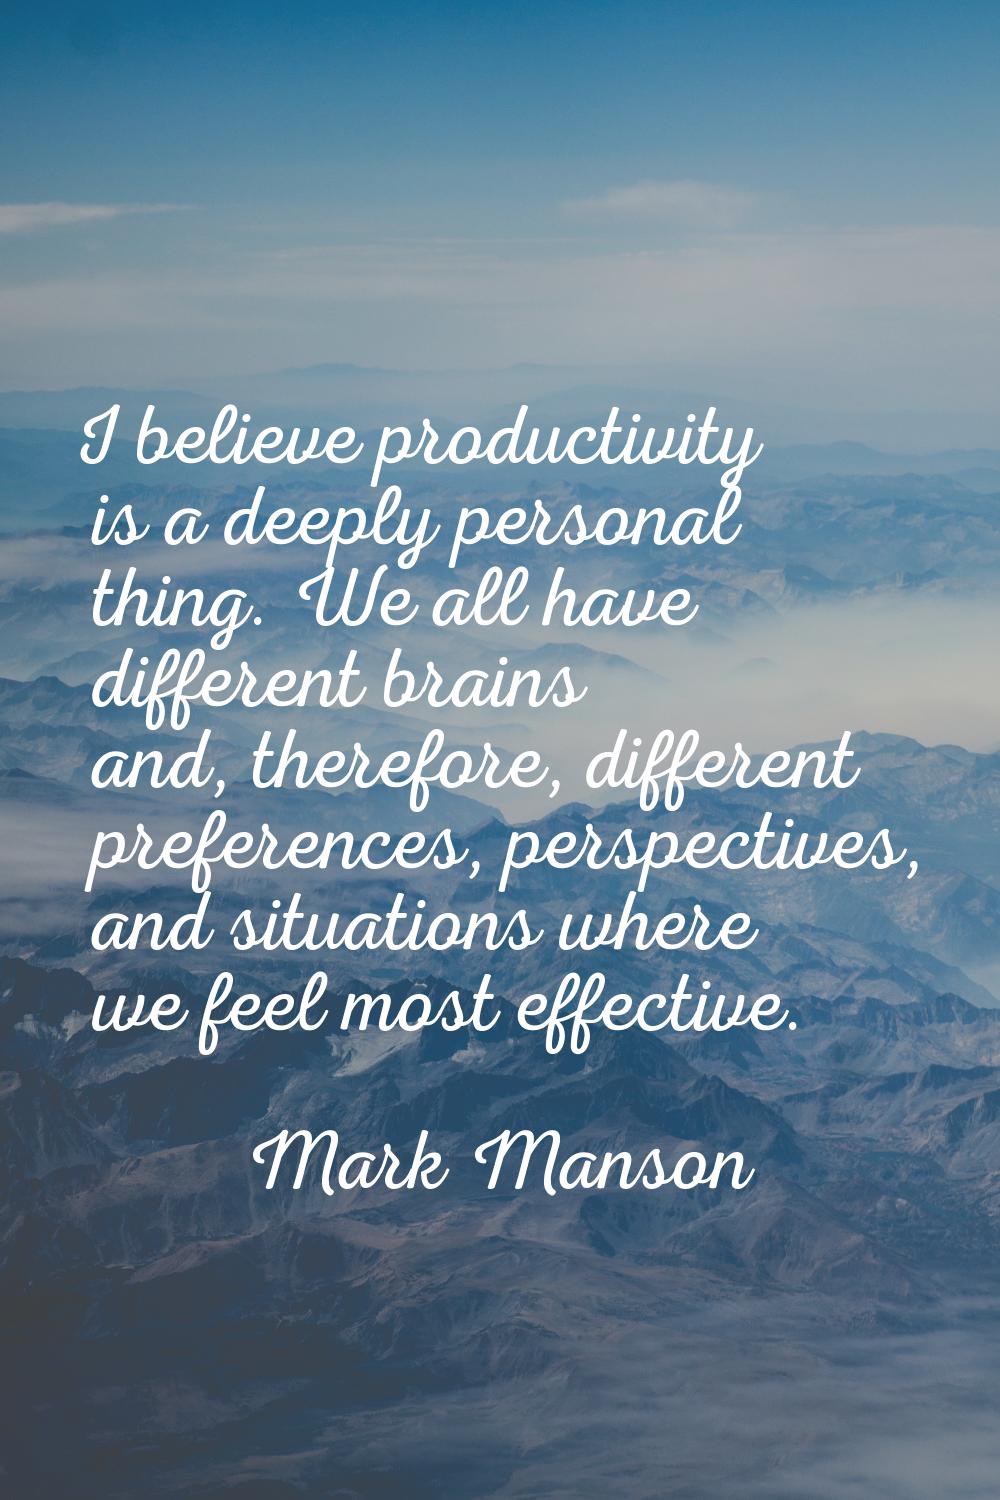 I believe productivity is a deeply personal thing. We all have different brains and, therefore, dif